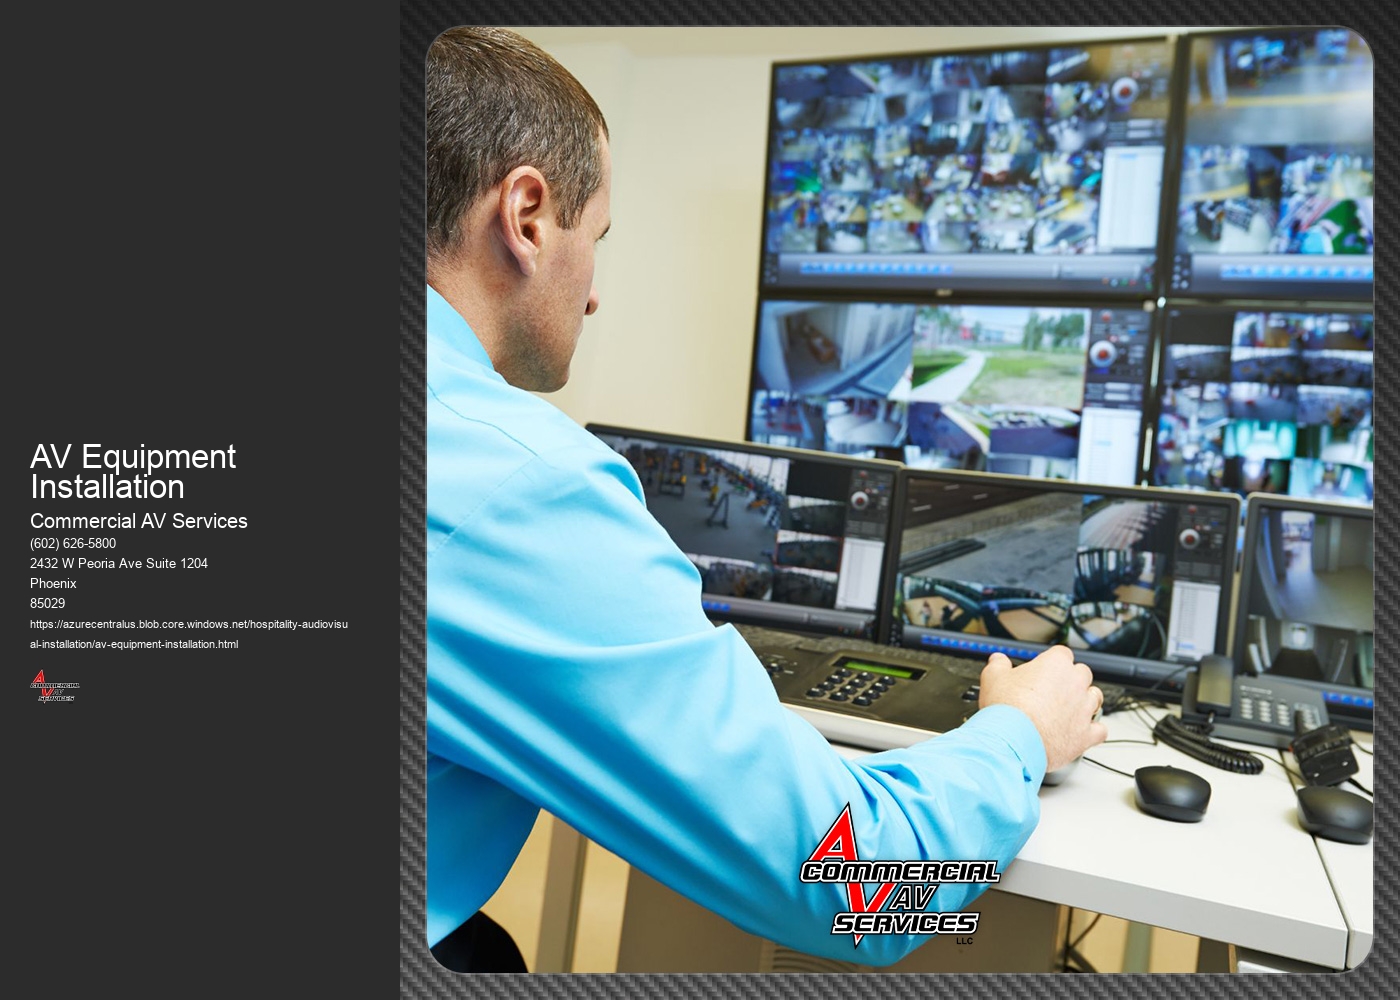 What are the common challenges faced during AV equipment installation and how do you overcome them?